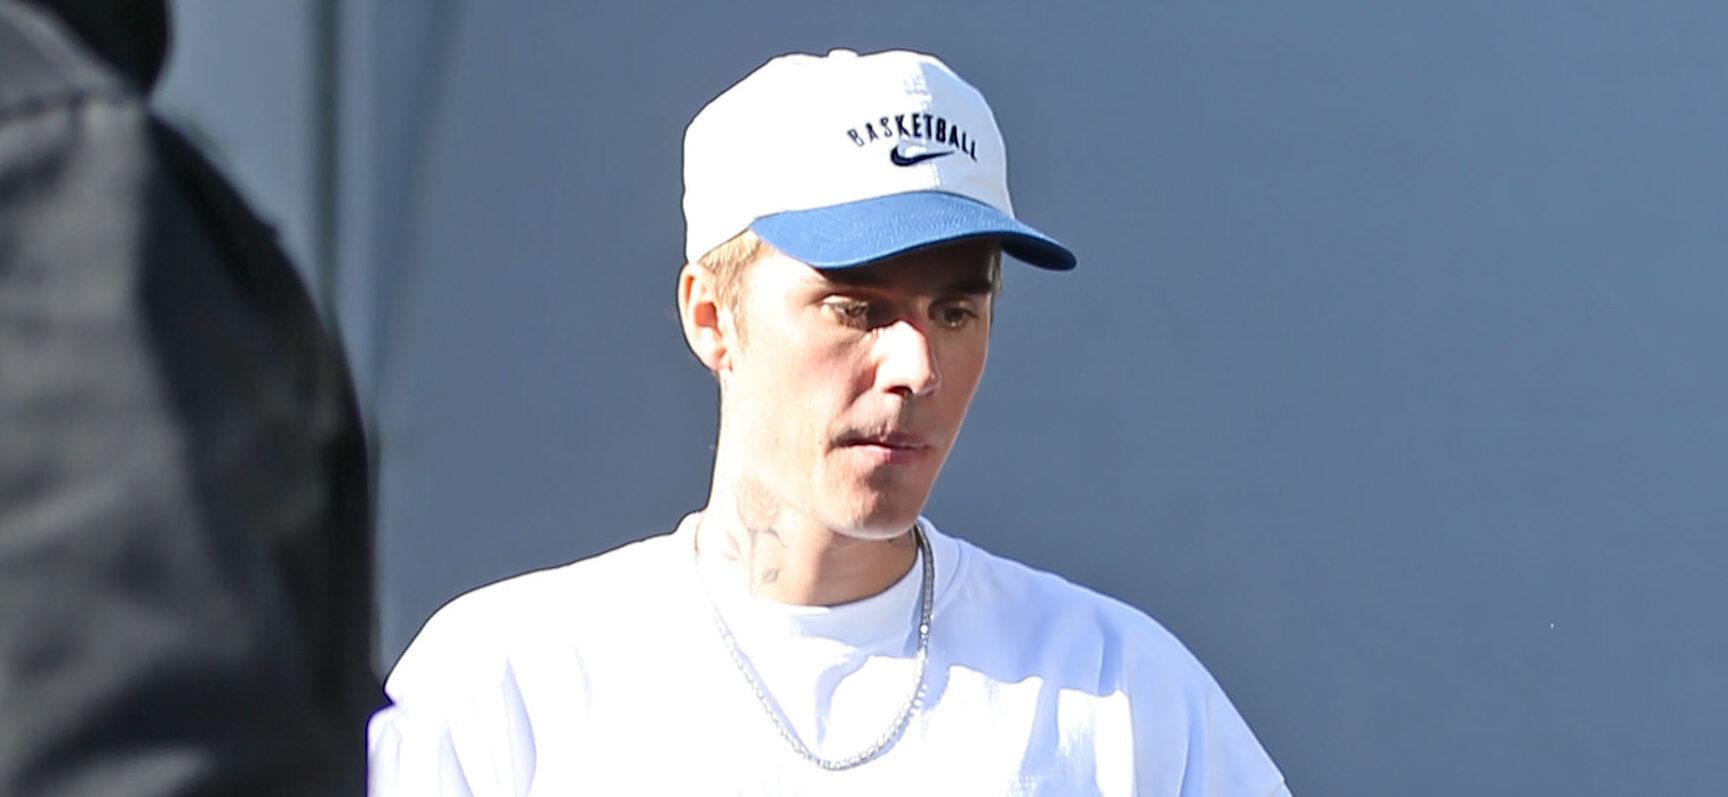 Justin Bieber Slams H&M For Putting Out Merch Without His Approval: ‘DONT BUY IT’